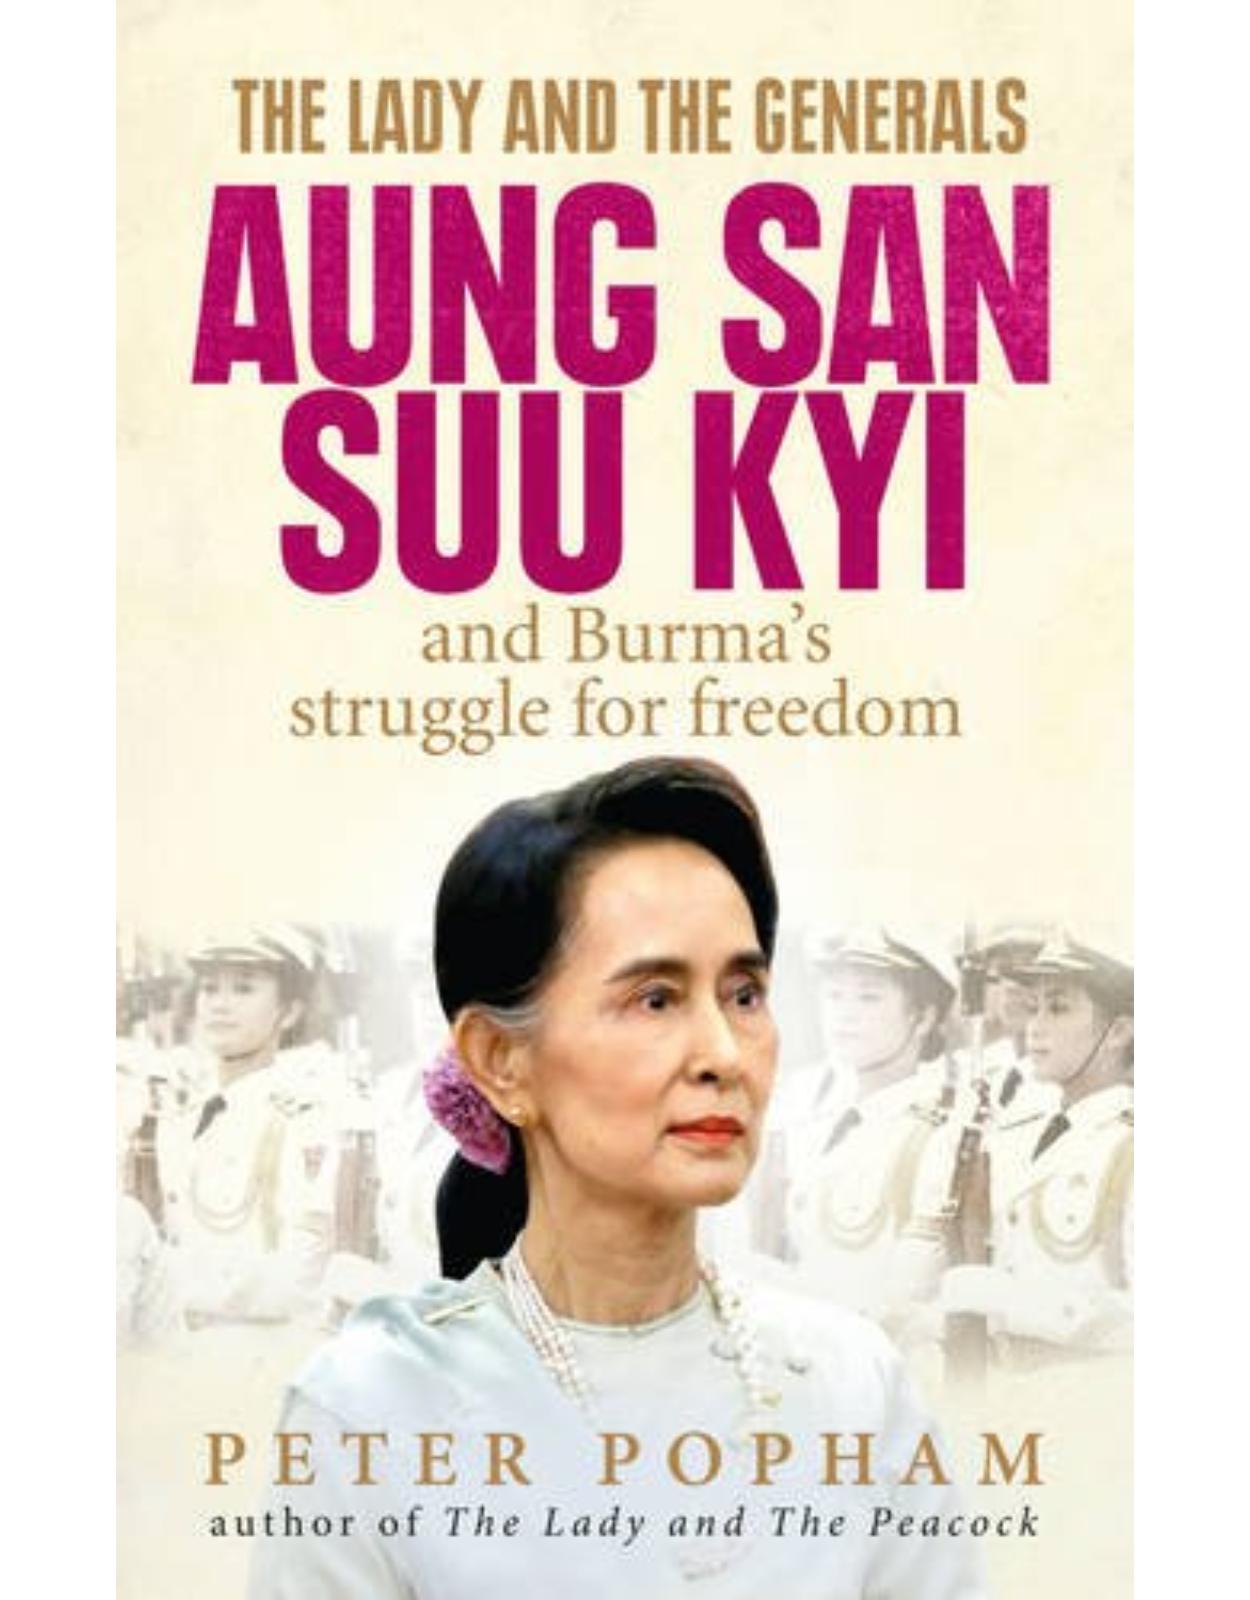 The Lady and the Generals: Aung San Suu Kyi and Burma’s struggle for freedom